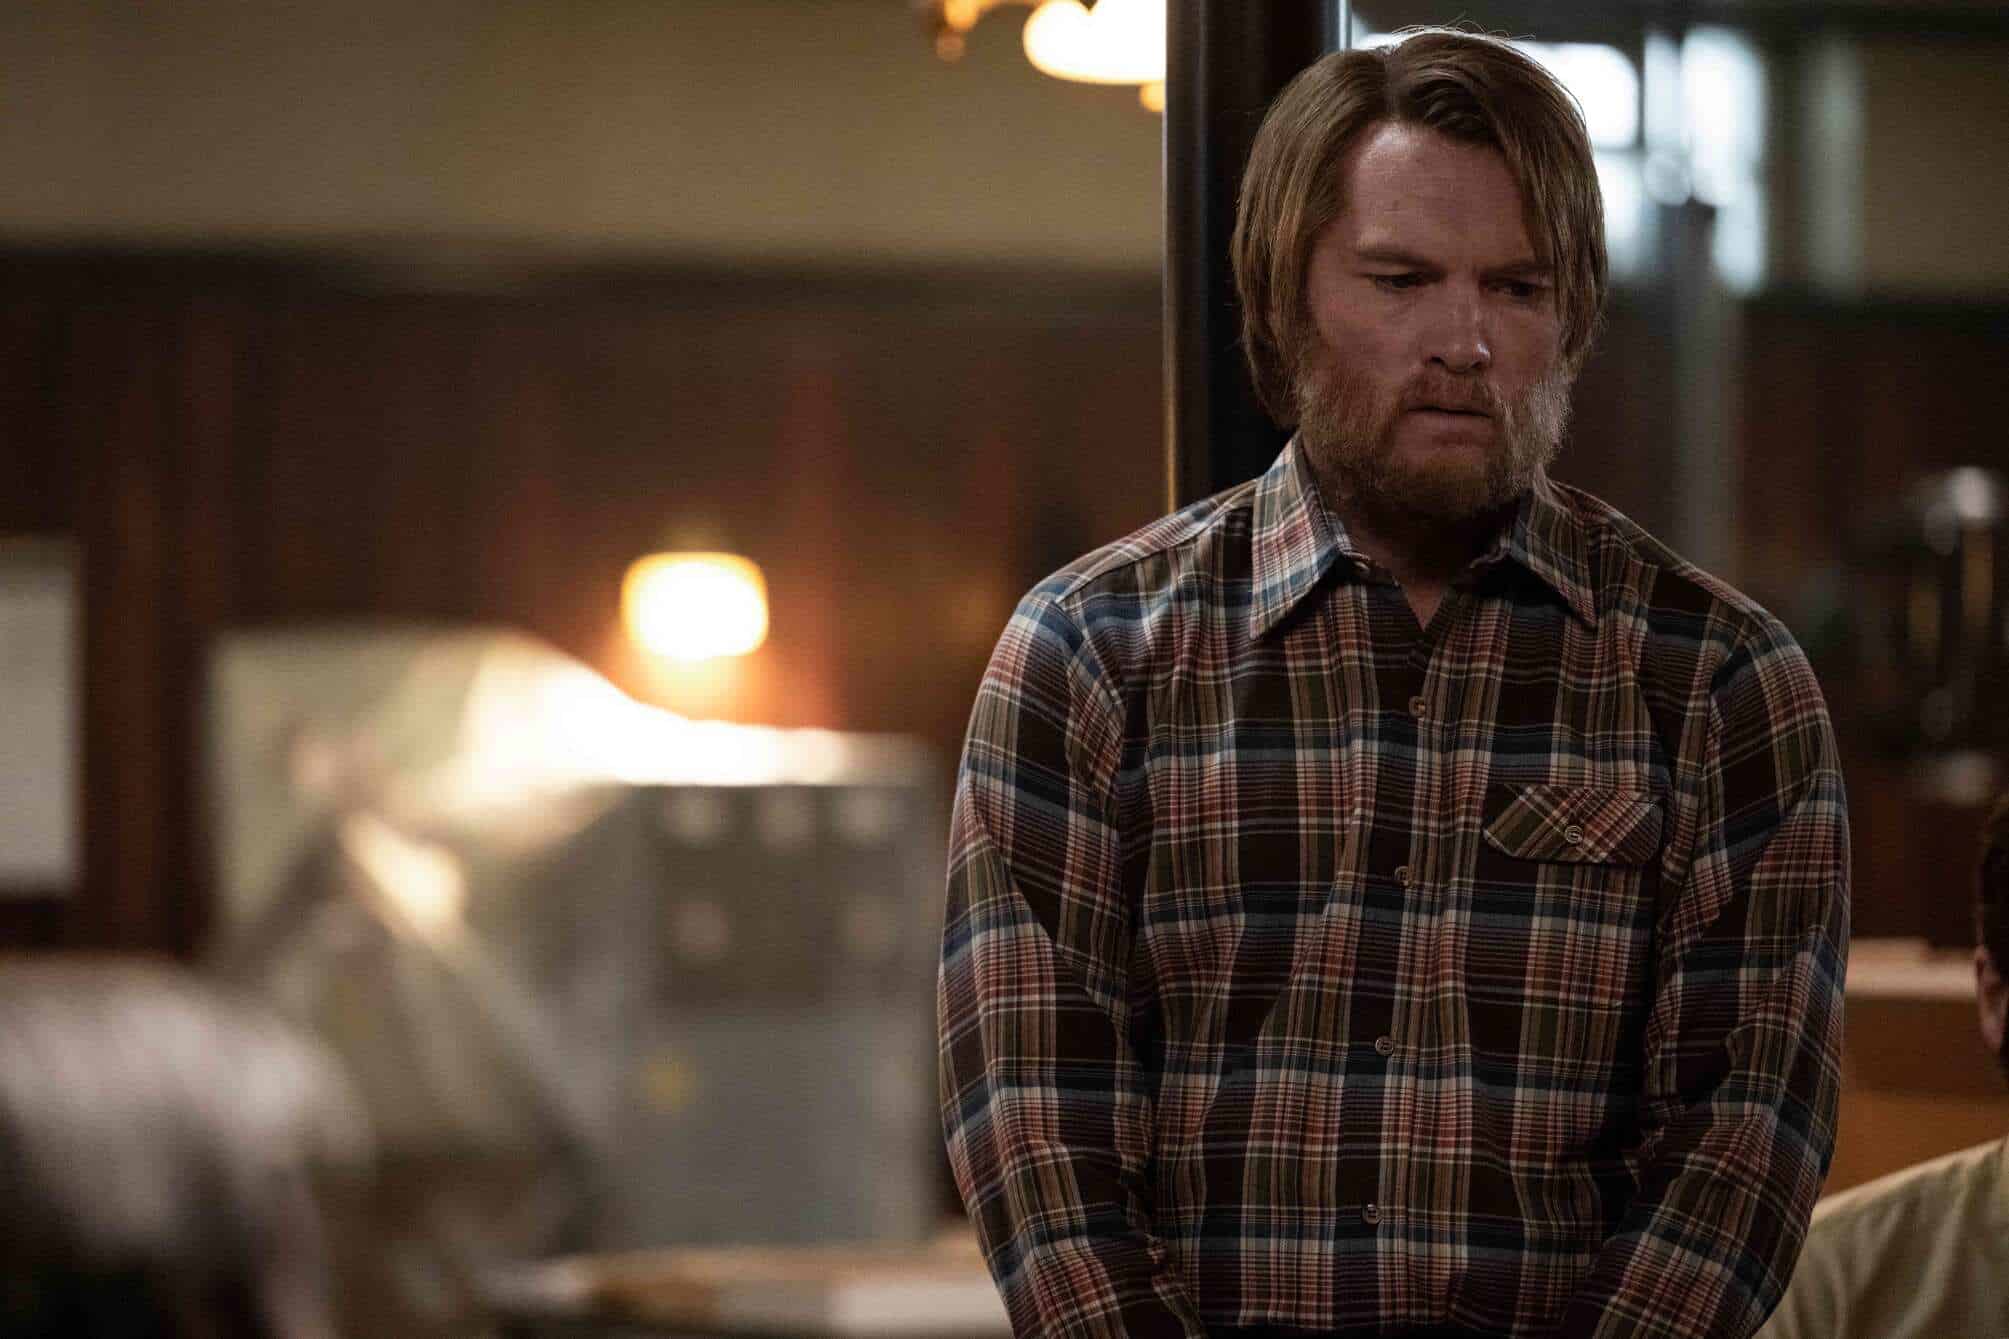 A man in a plaid button-up looks worried in this image from FX Productions.